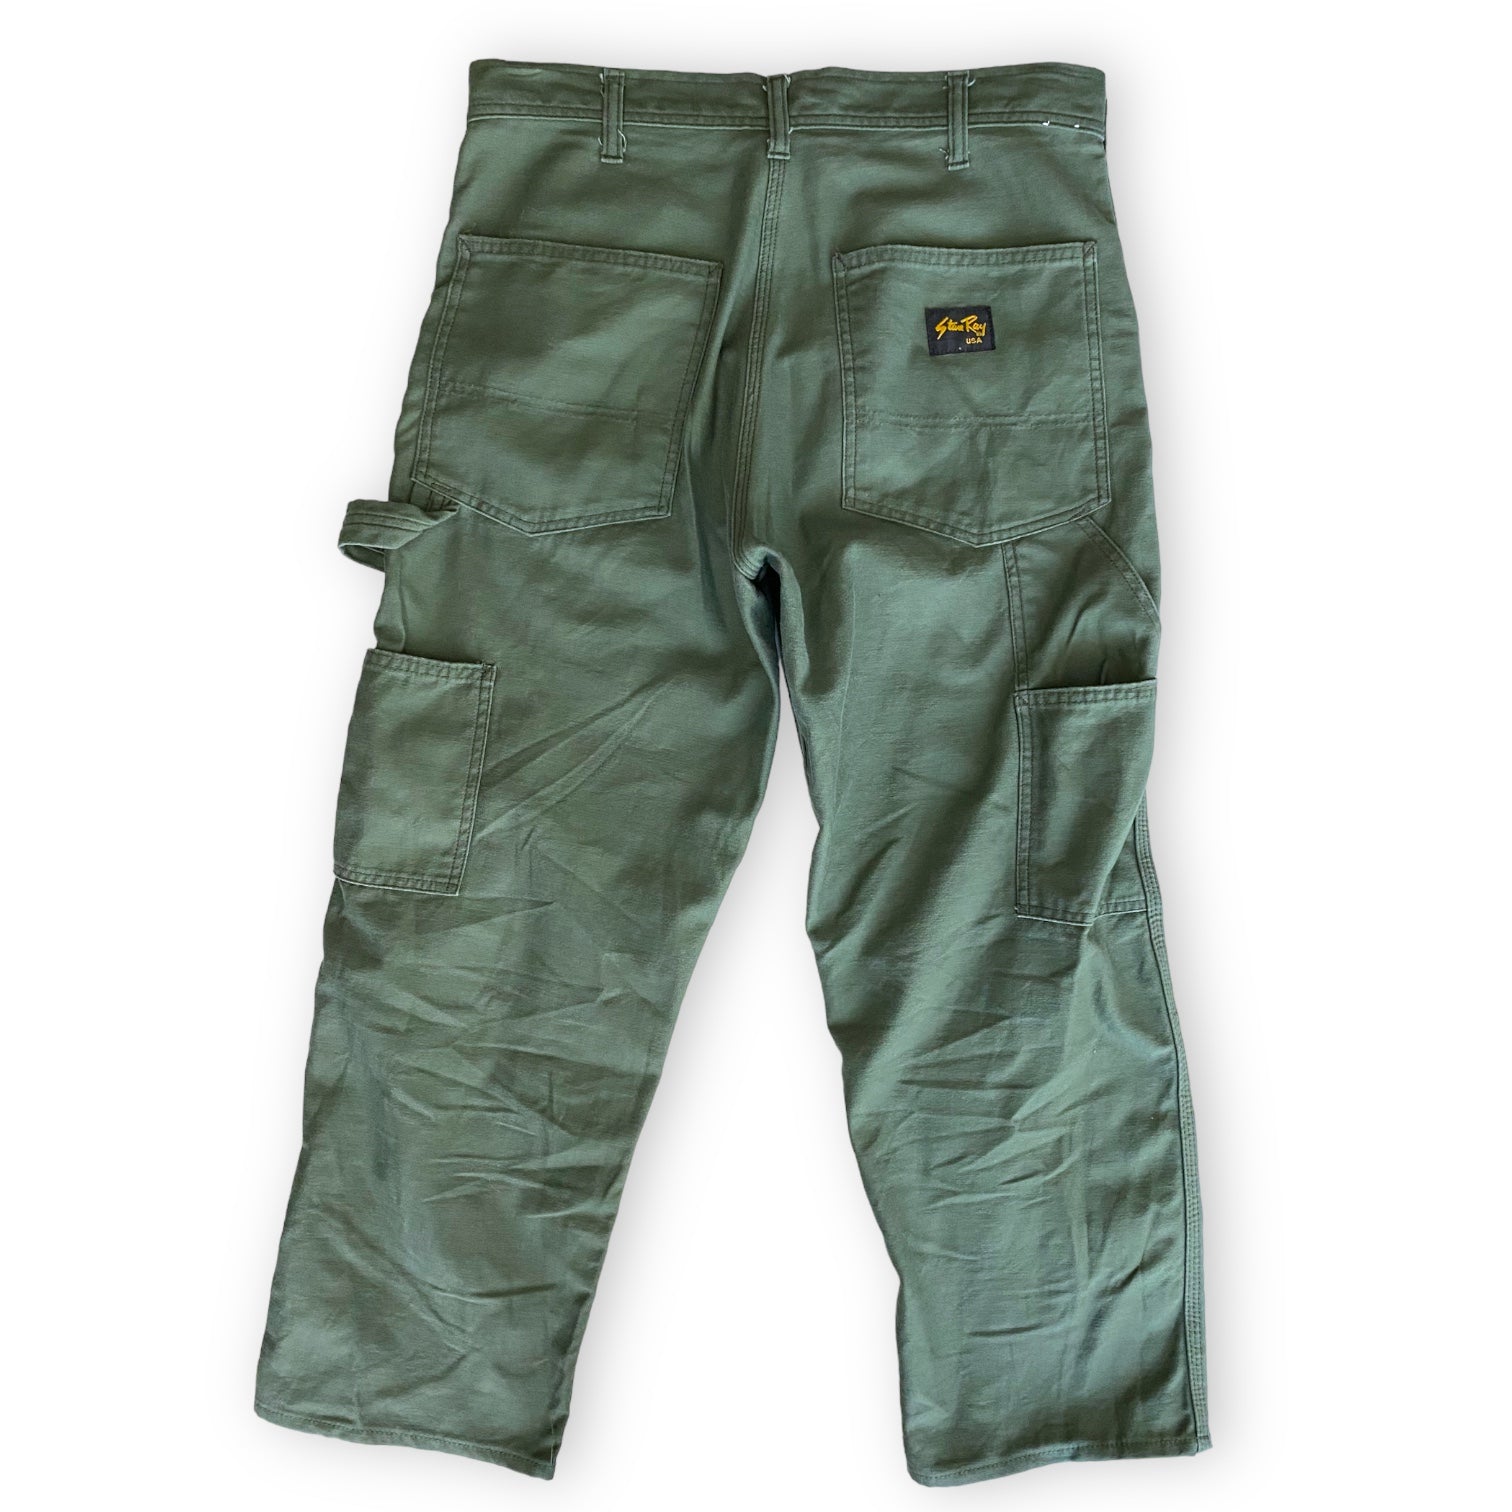 StanRay Green Painters Pants